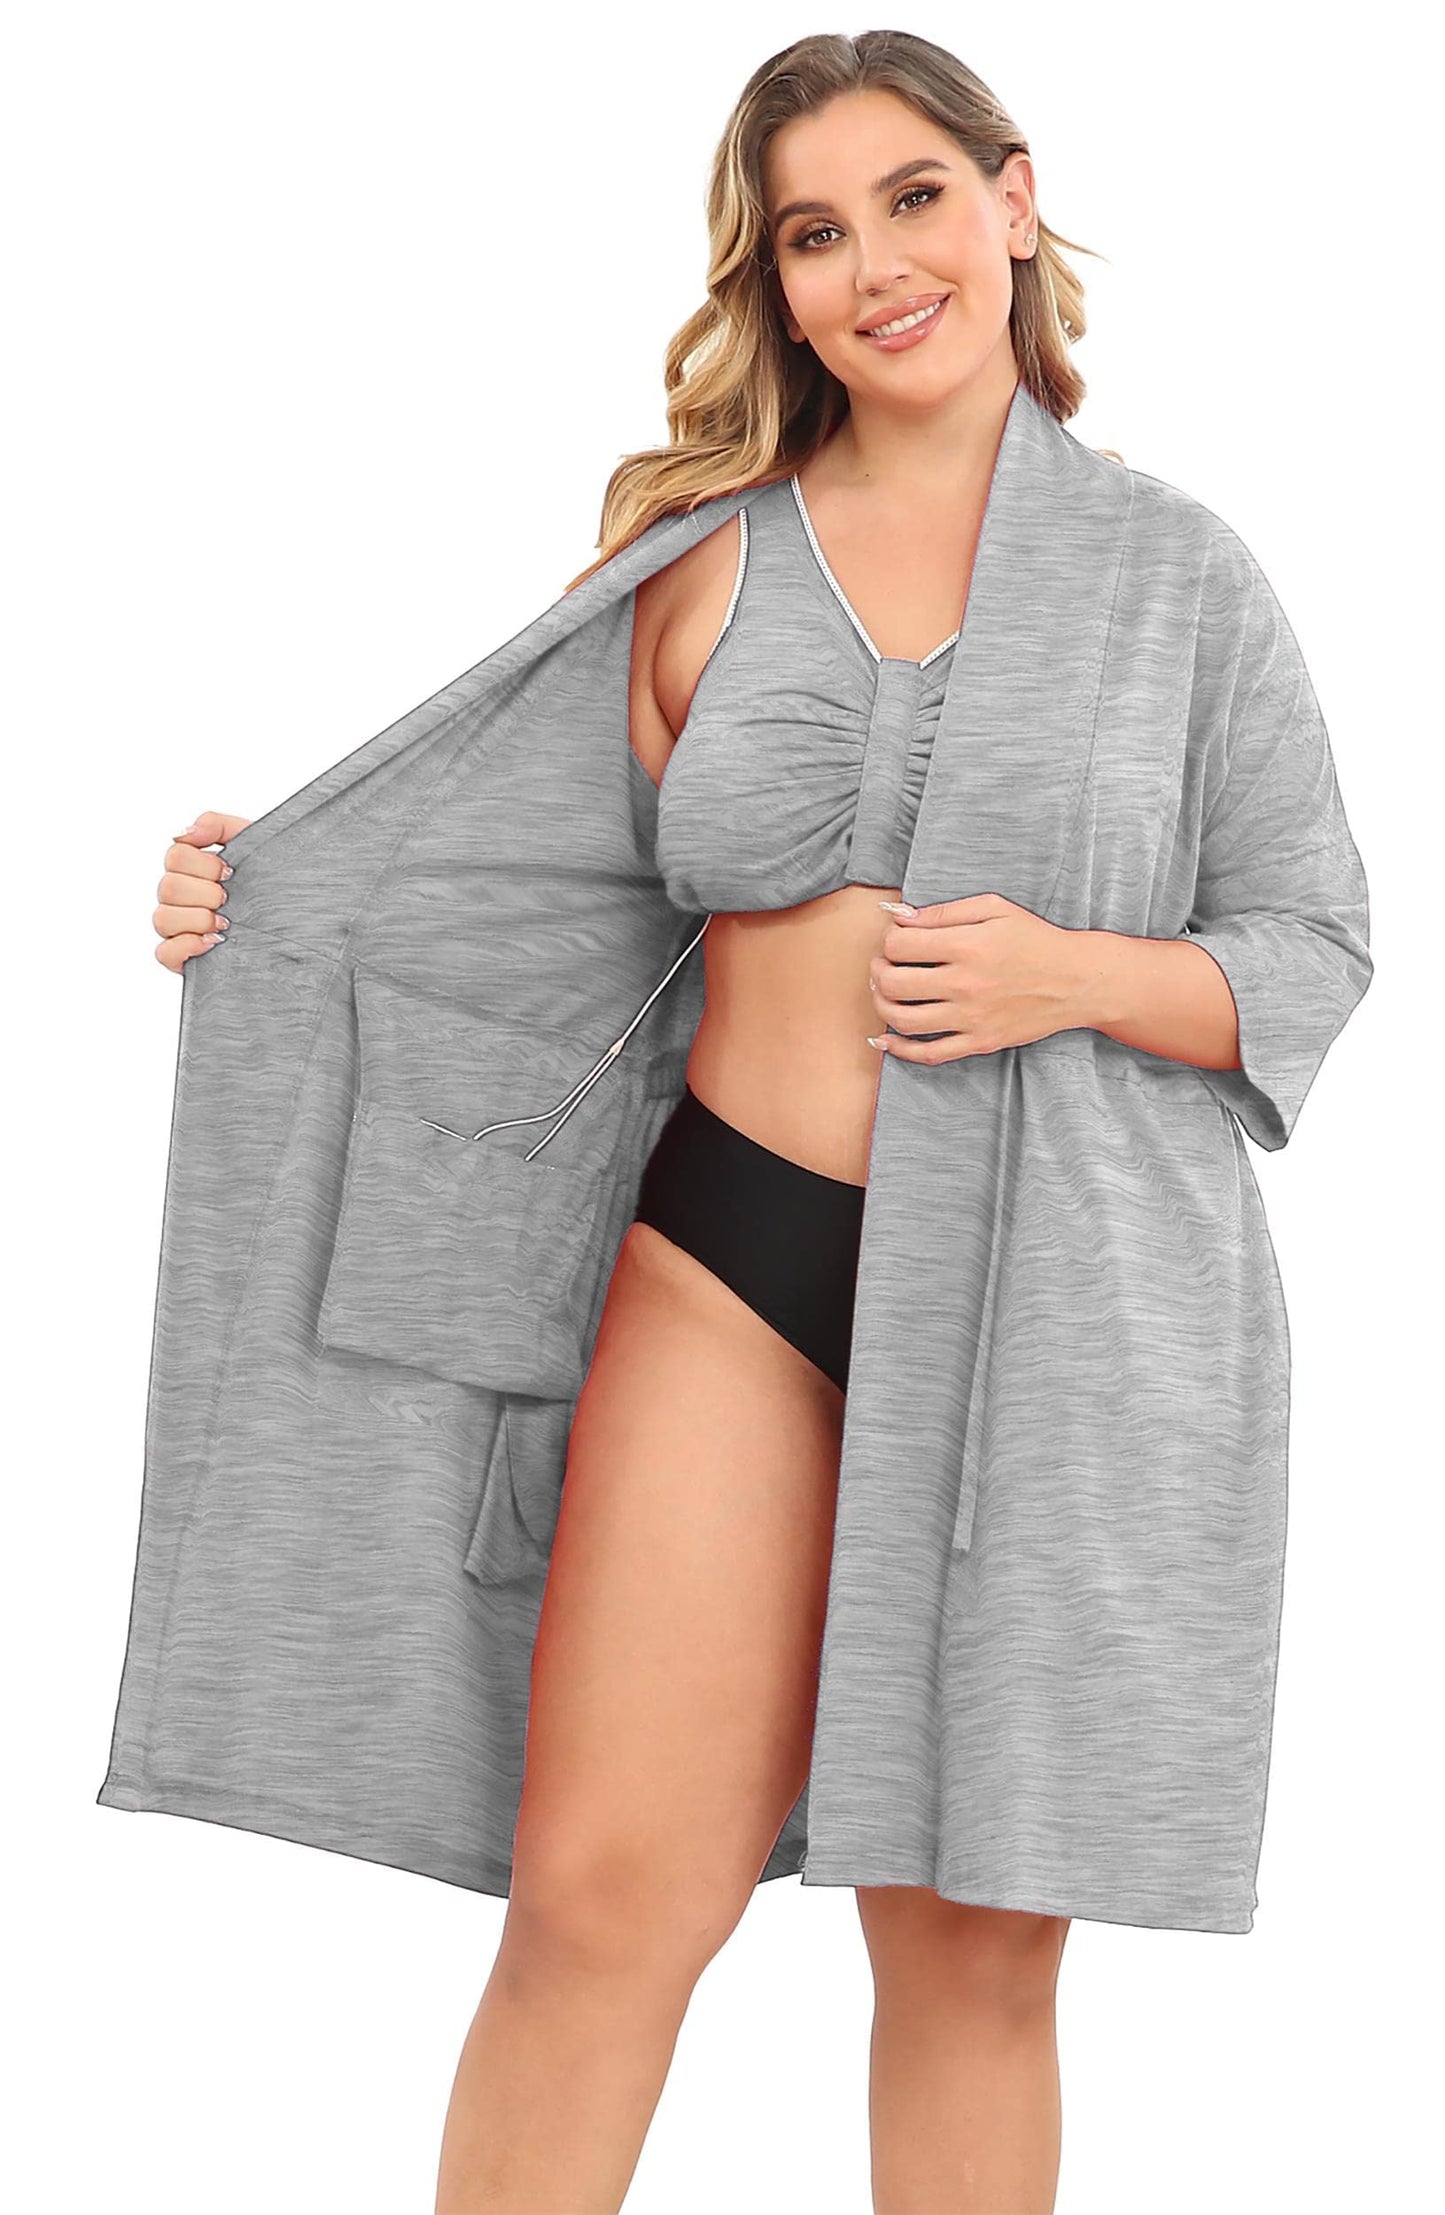 Post Surgery Mastectomy Bra Breast Cancer Recovery Robe with Internal Pockets for Post-Surgical Drains